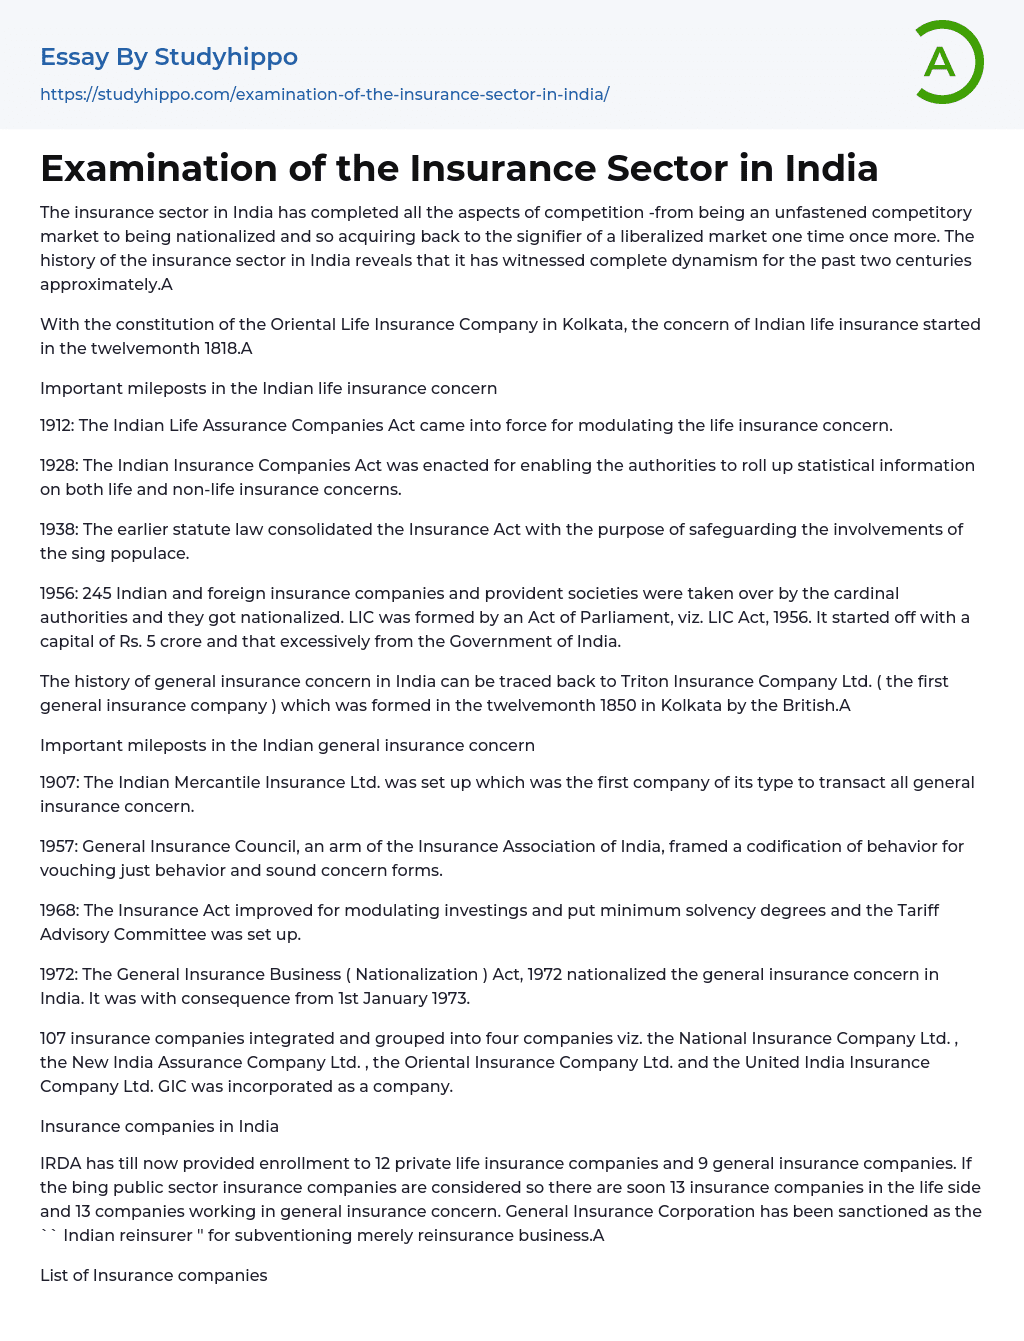 Examination of the Insurance Sector in India Essay Example